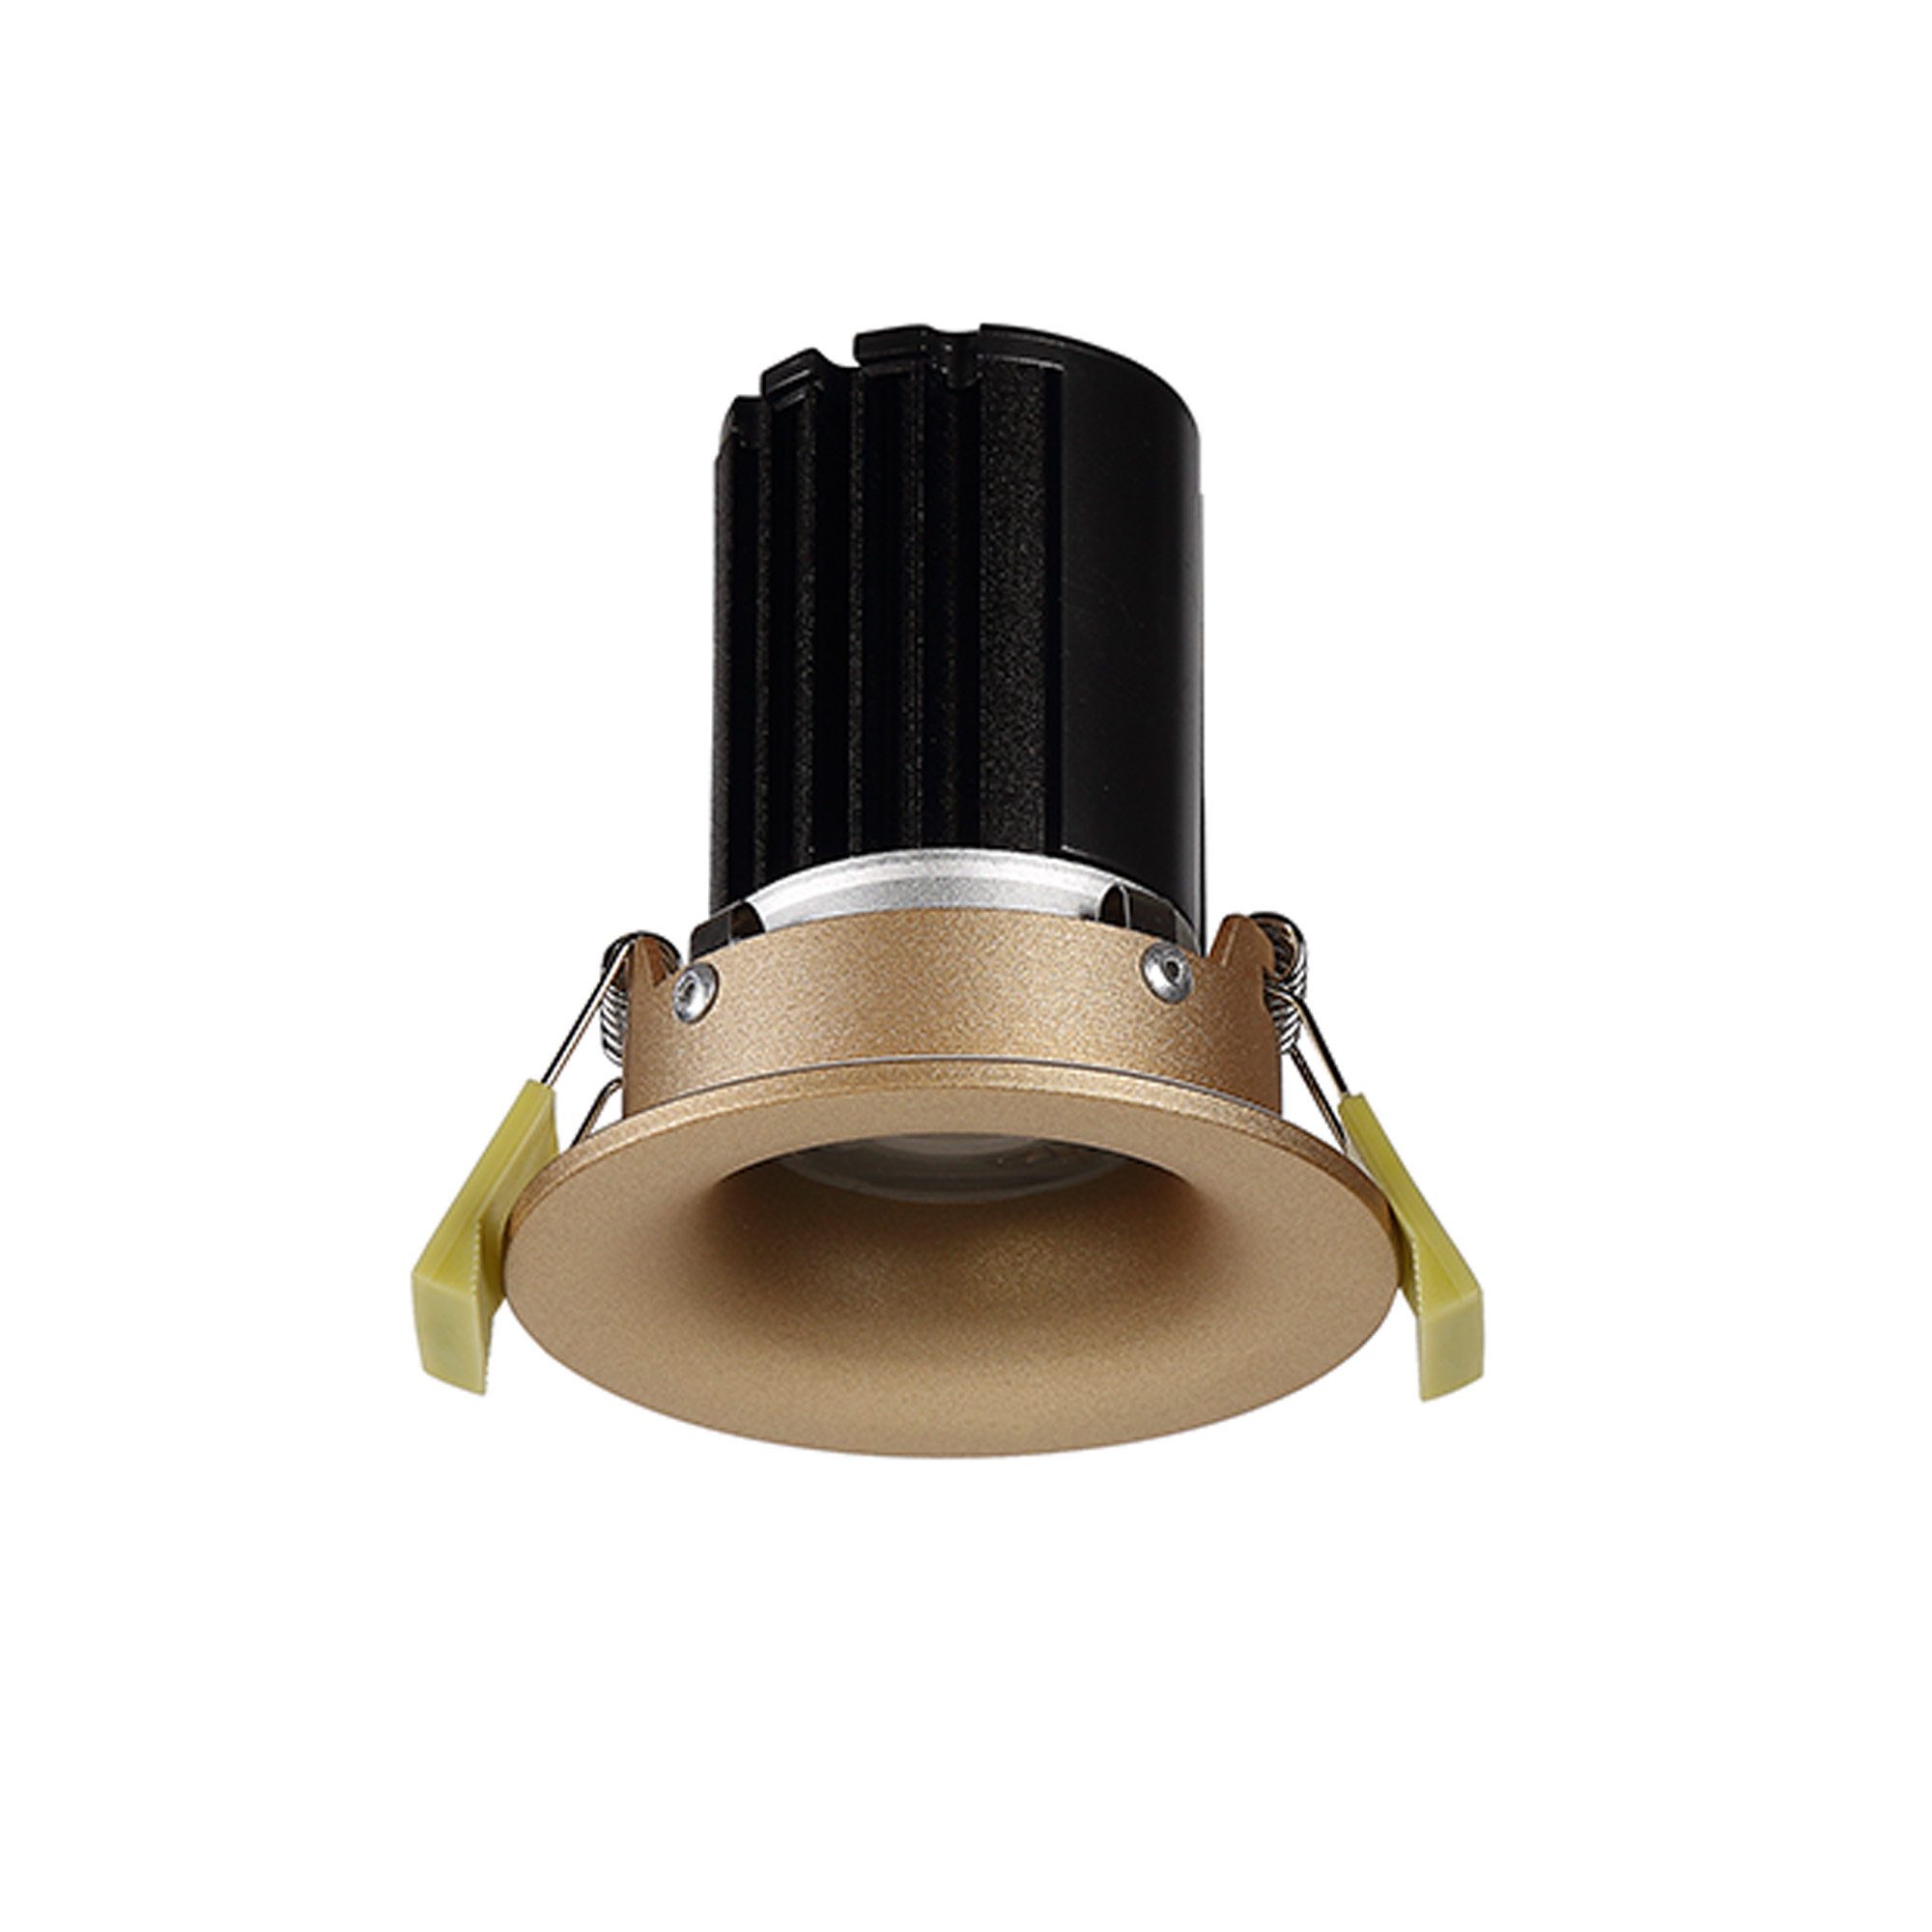 DM201486  Bruve 9 Tridonic powered 9W 2700K 700lm 24° LED Engine;250mA ; CRI>90 LED Engine Champagne Gold Fixed Round Recessed Downlight; Inner Glass cover; IP65